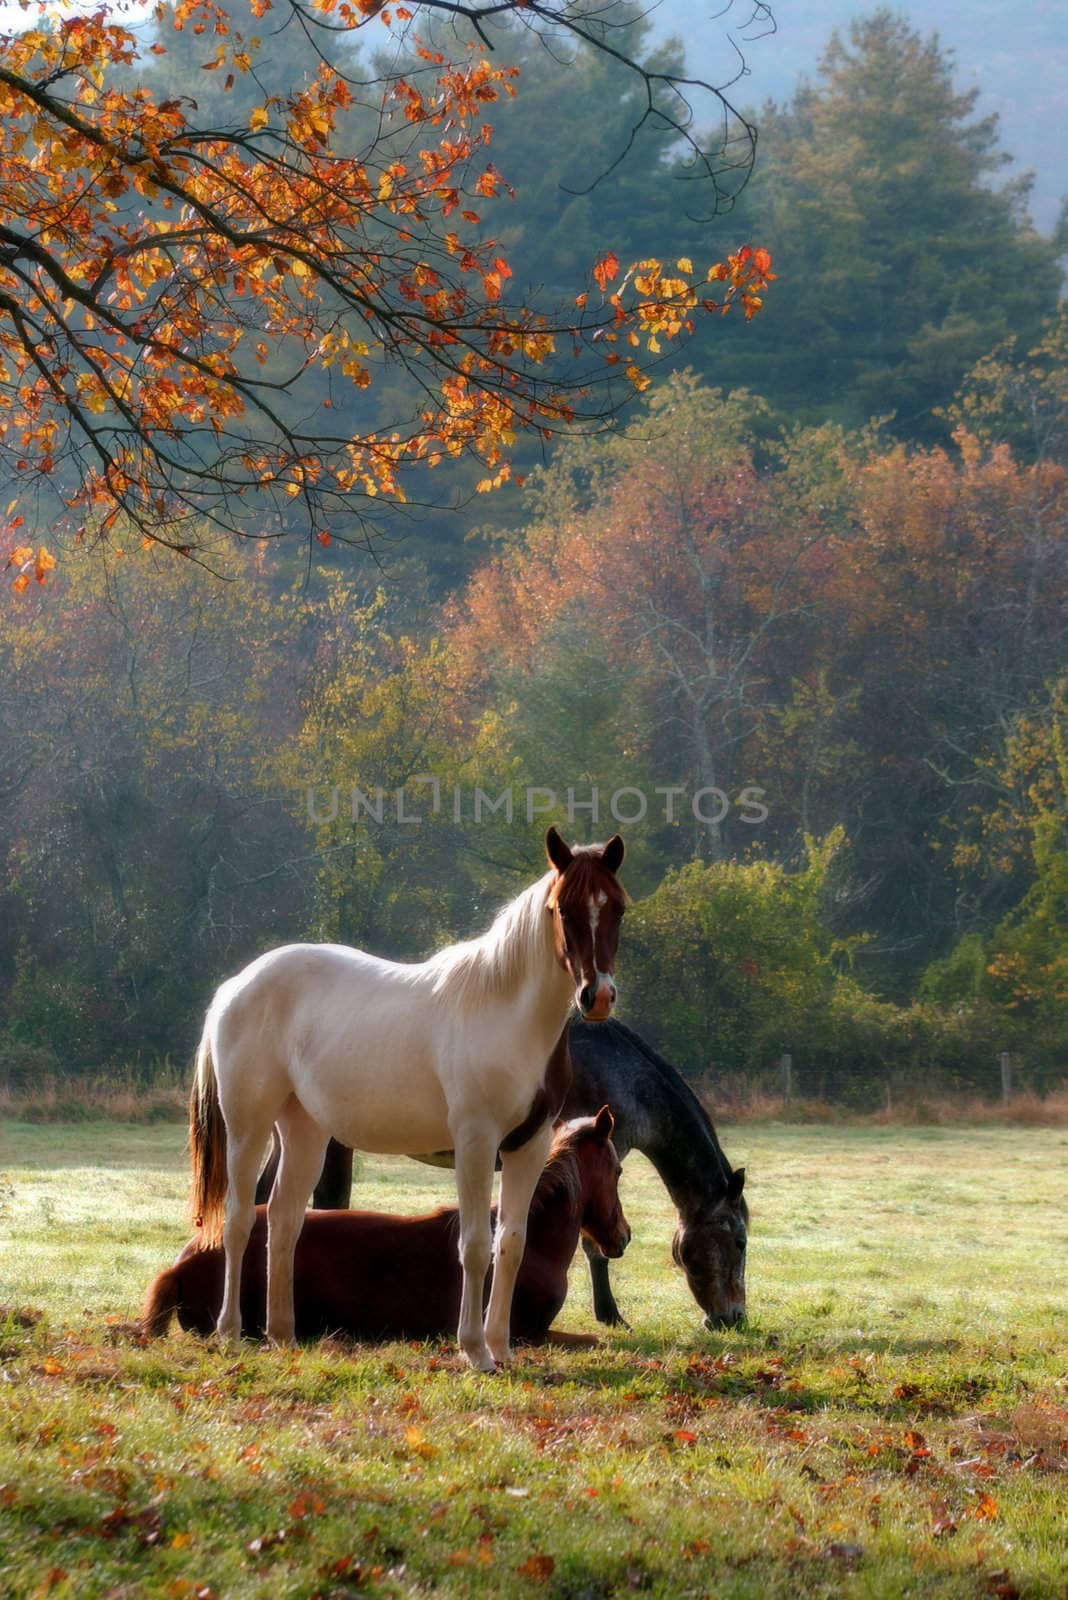  Three horses on a fall day with a mist in the air and a soft focus filter used to enhance the mood.